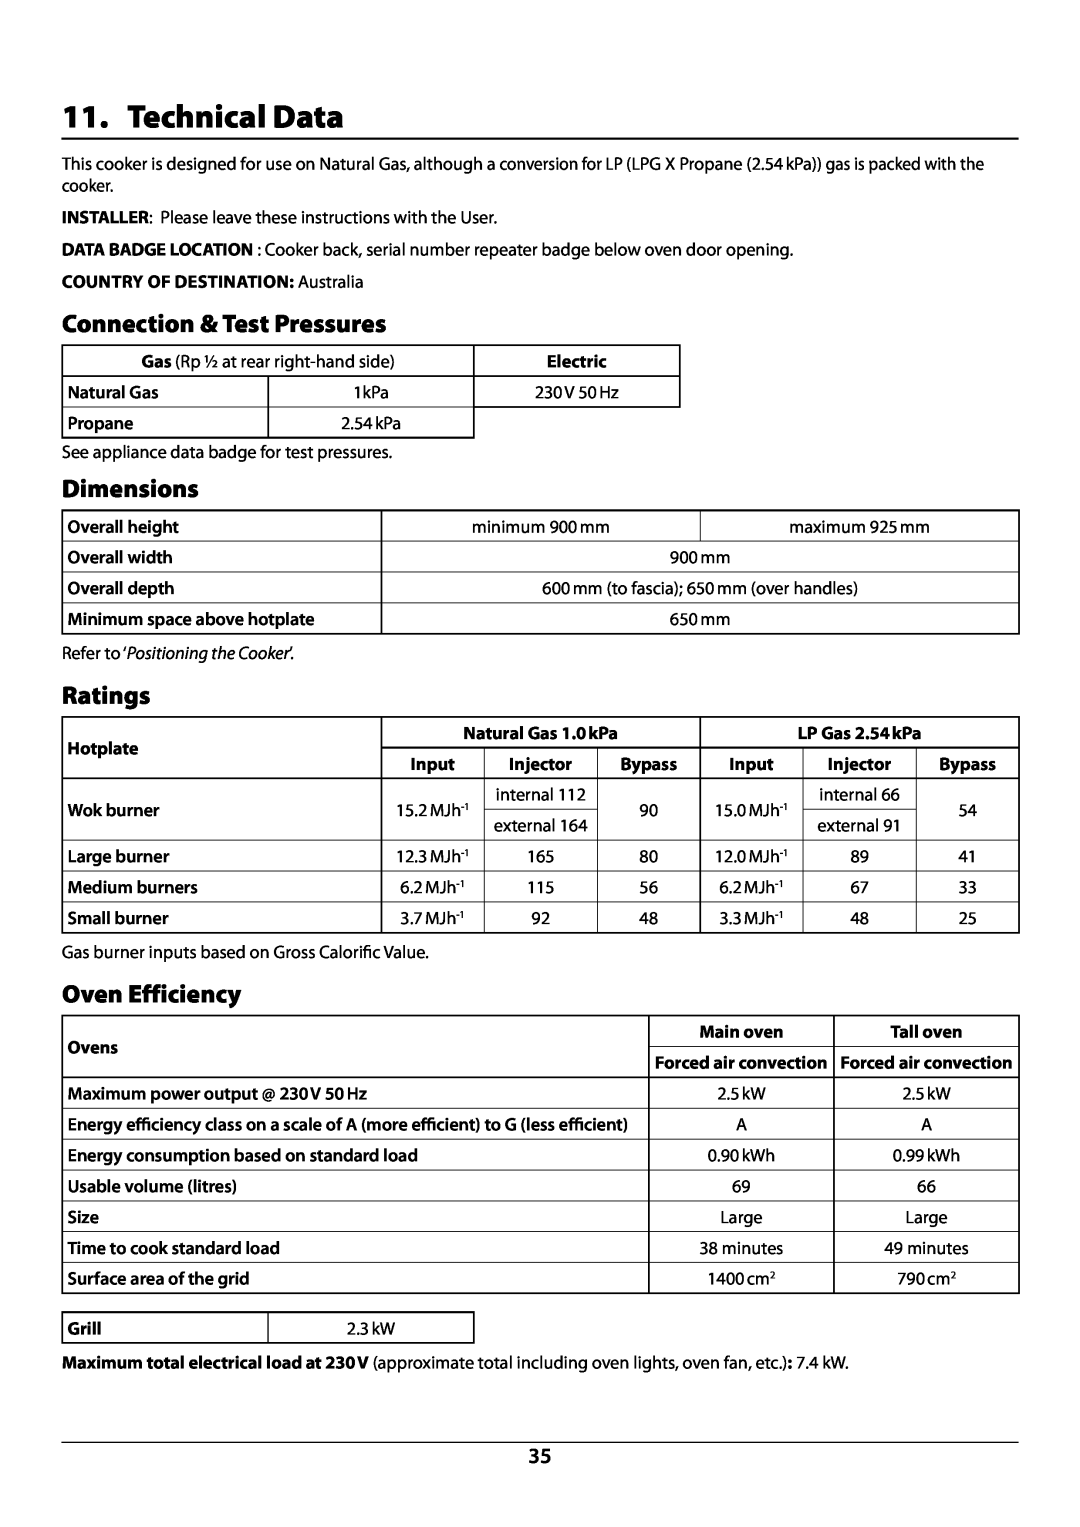 Falcon U108610-07 Technical Data, COUNTRY OF DESTINATION Australia, Natural Gas, Propane, Overall height, Overall width 